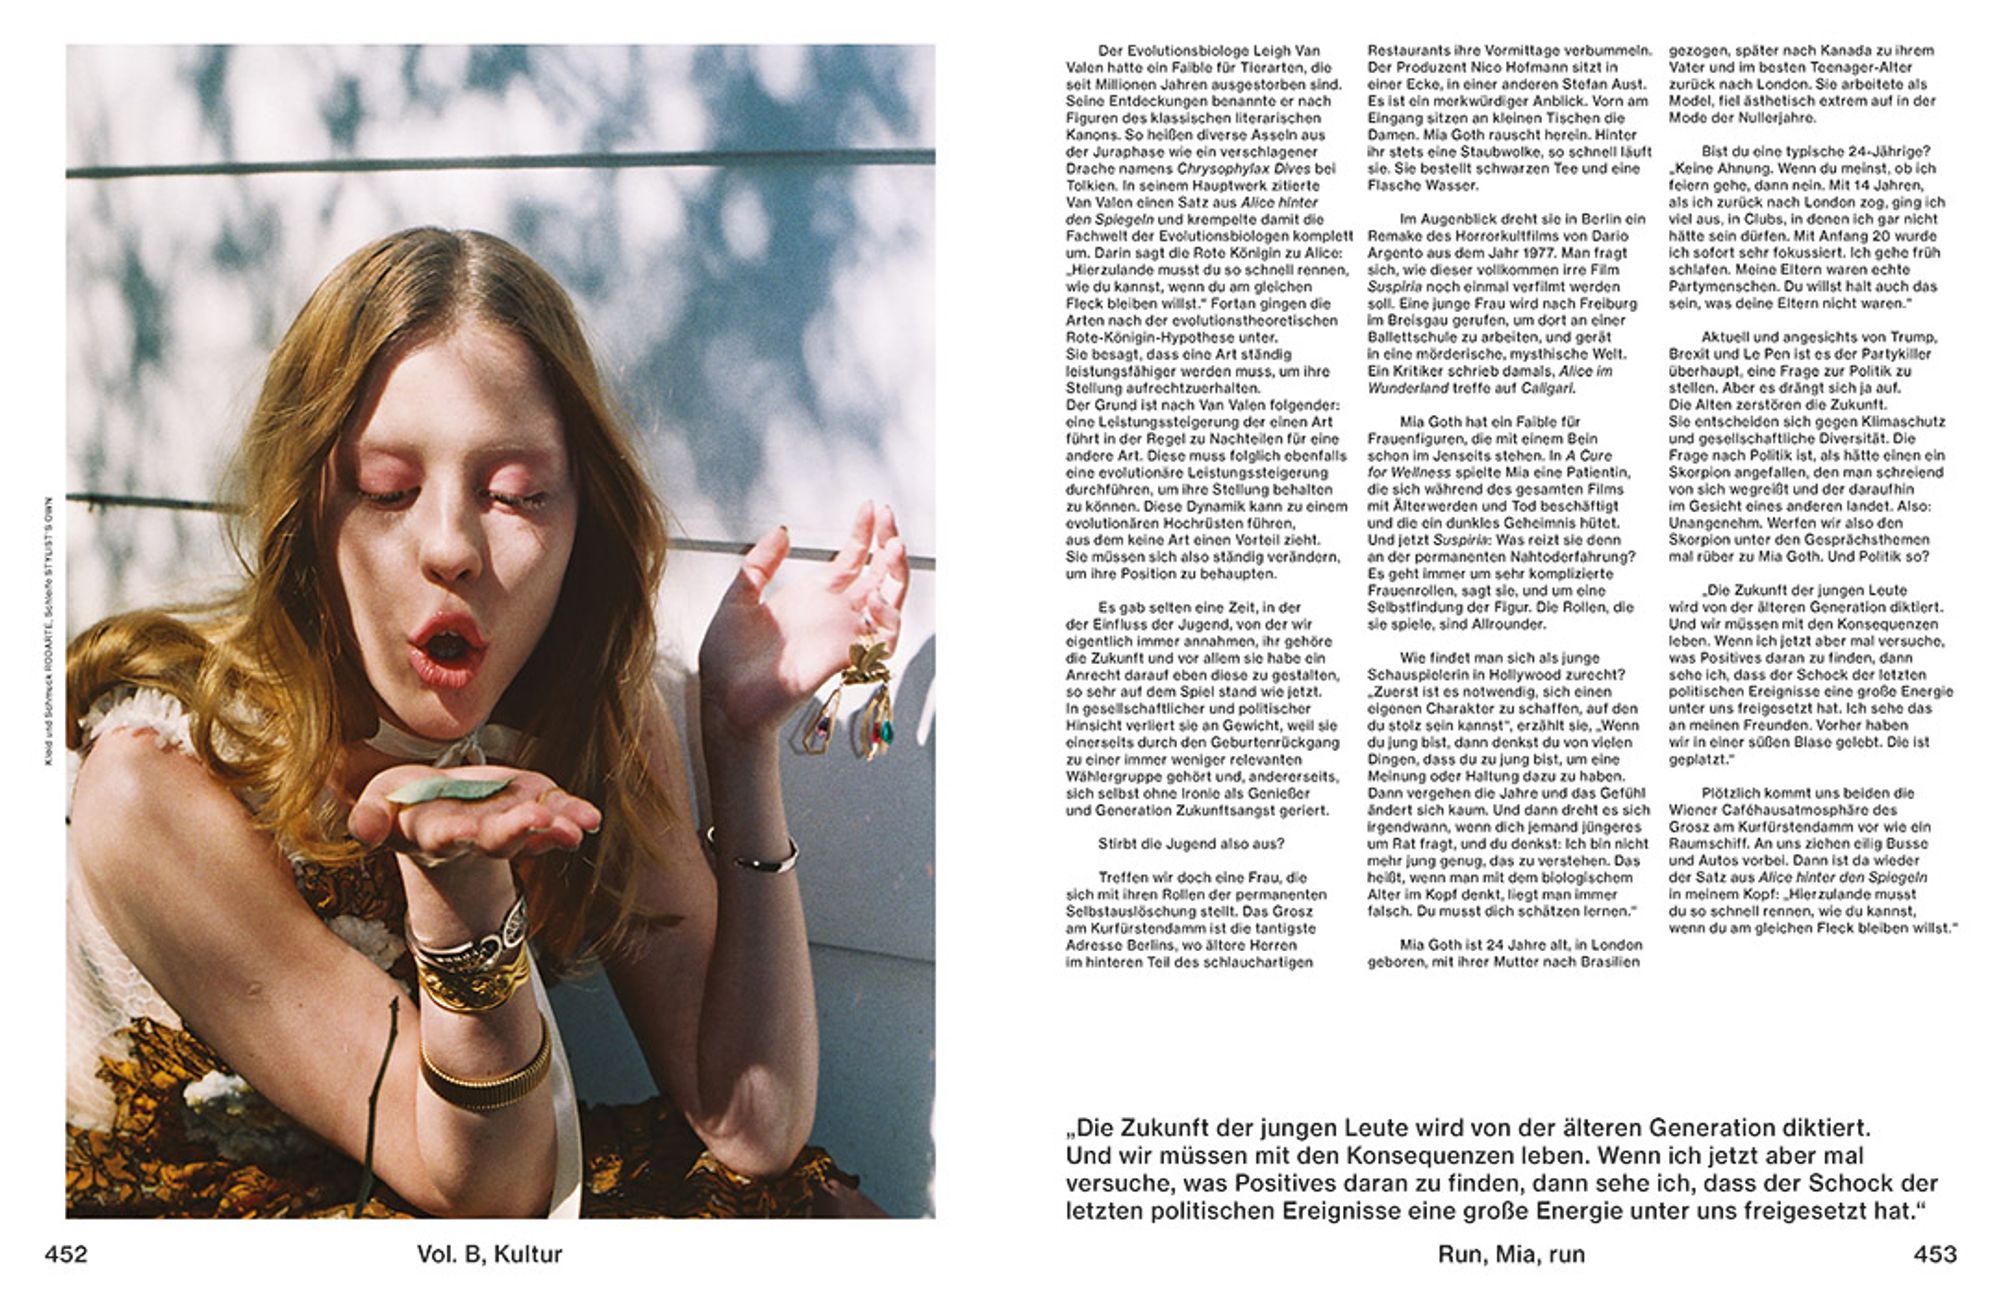 CREATIVE DIRECTION – EDITORIAL DIRECTION ISSUE 02 VOL.B